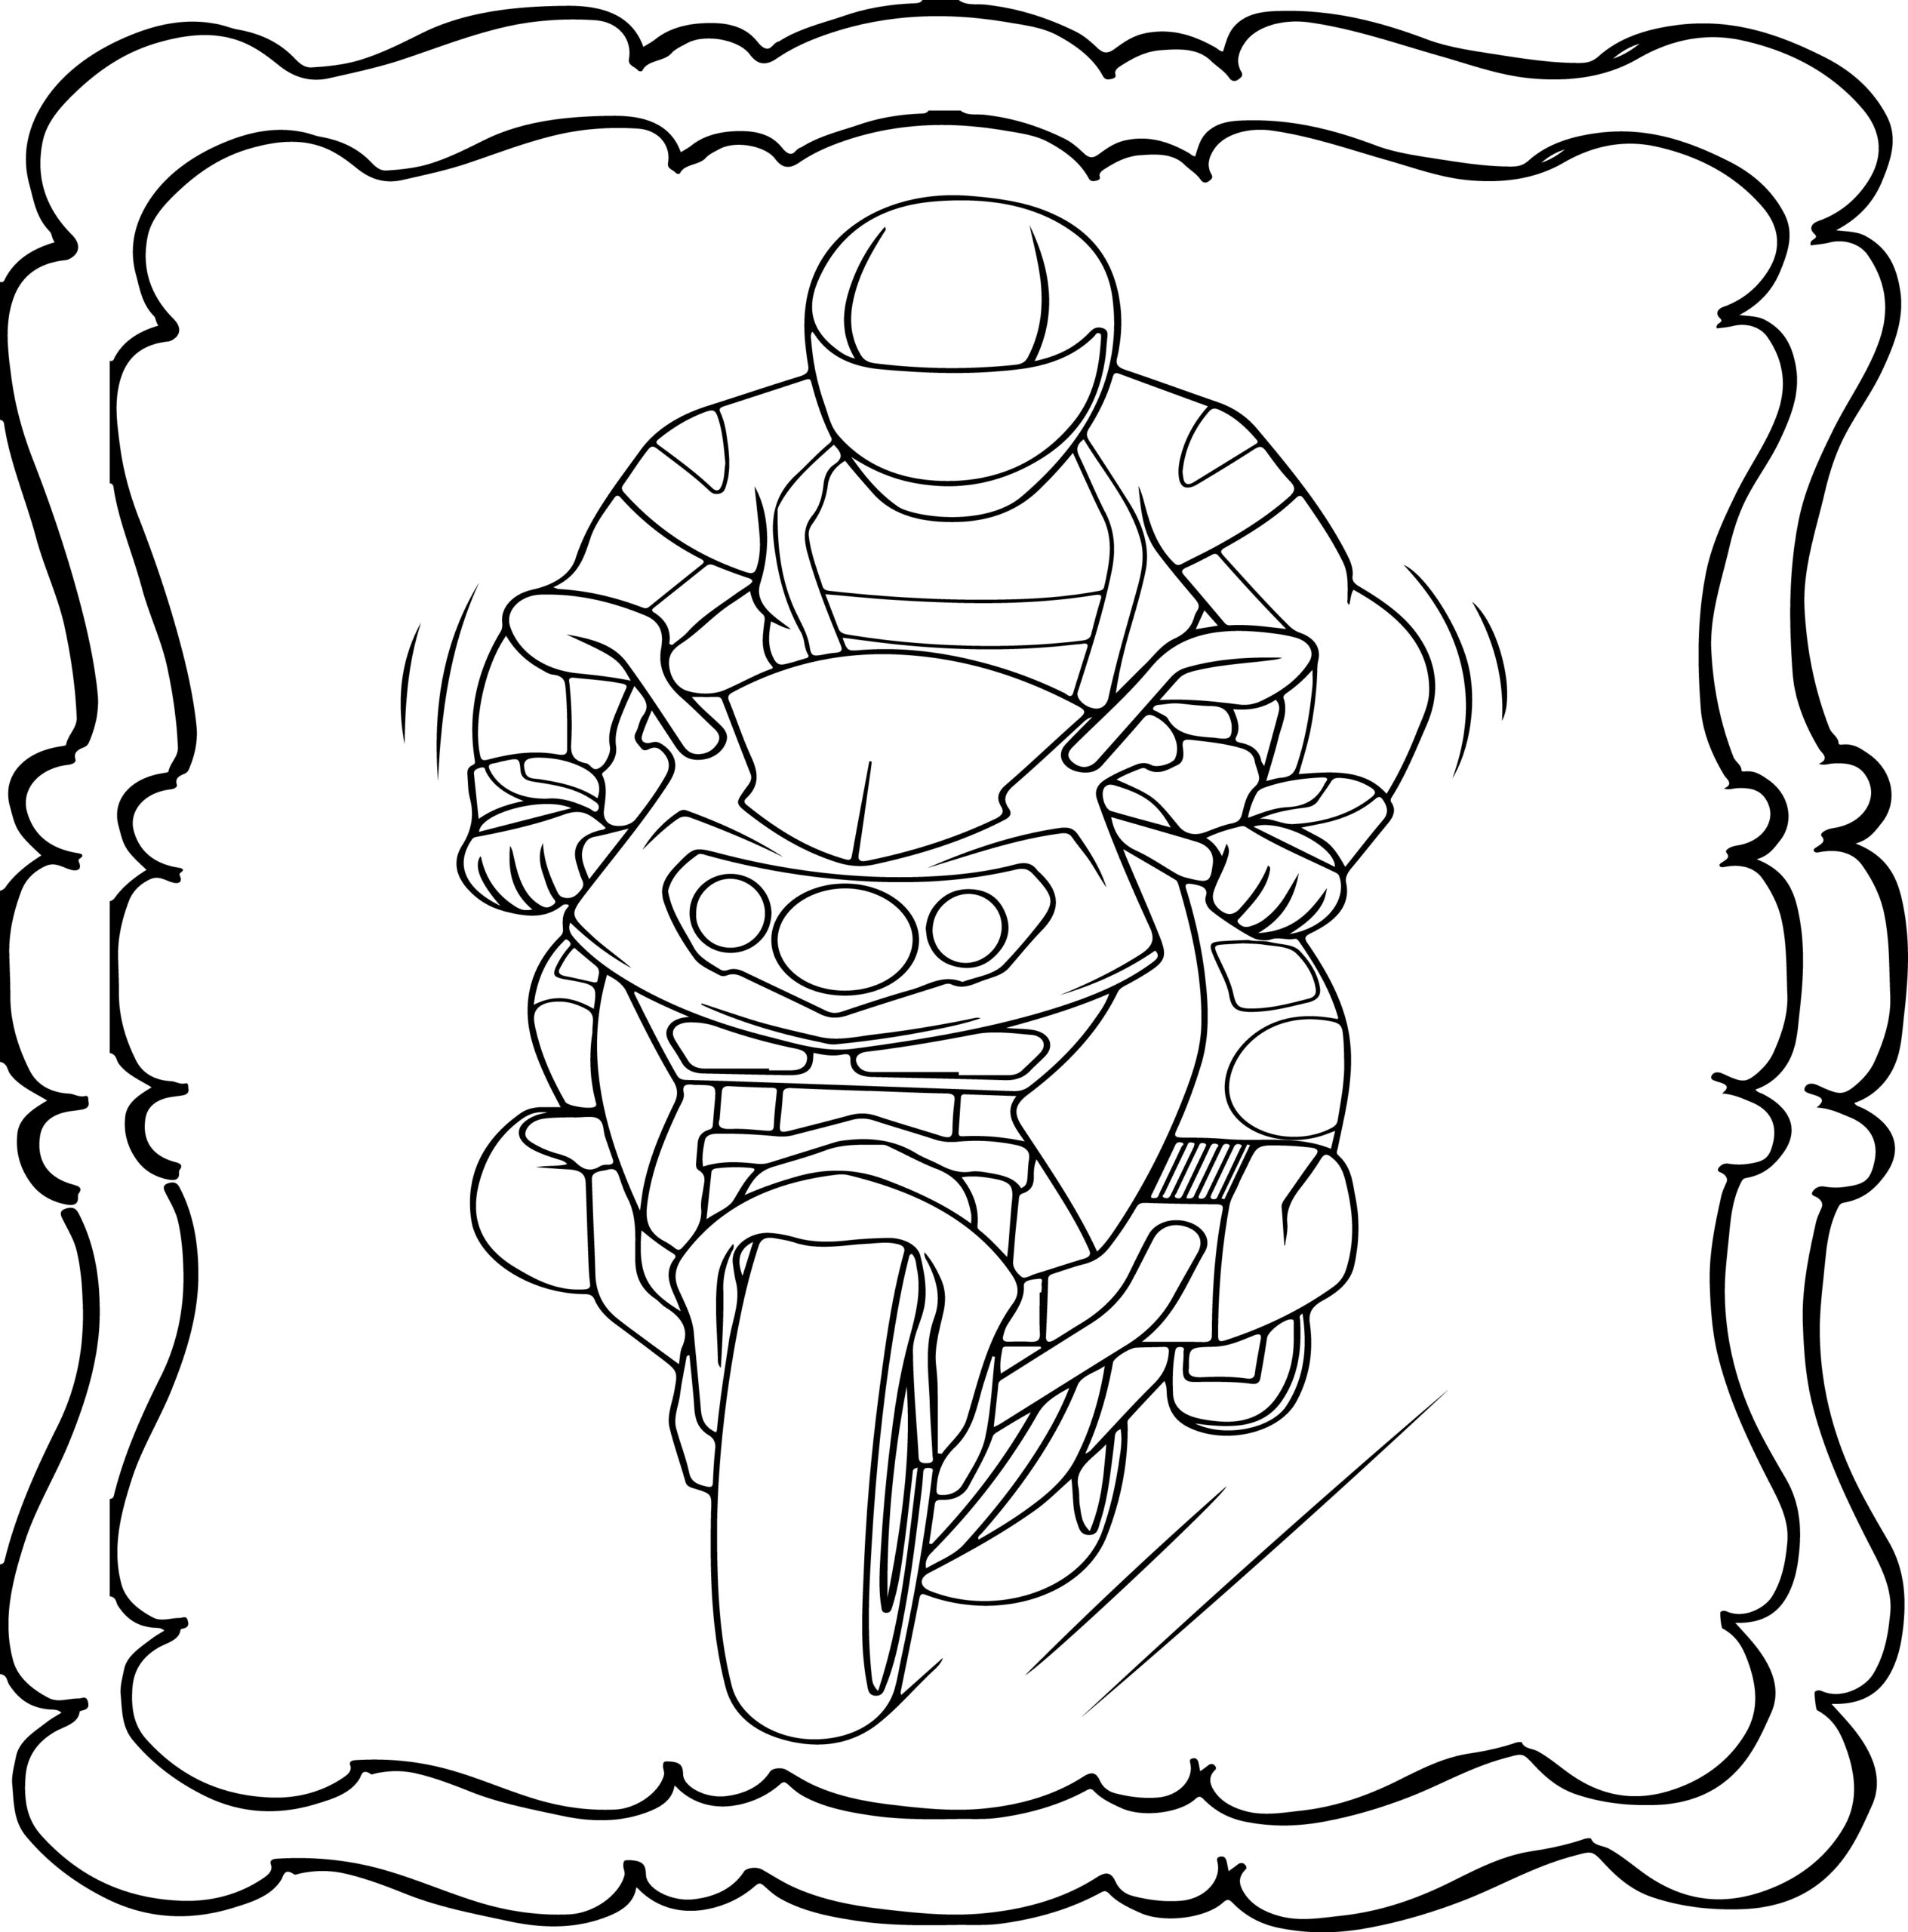 Motorcycle coloring book easy and fun motorcycles coloring book for kids made by teachers